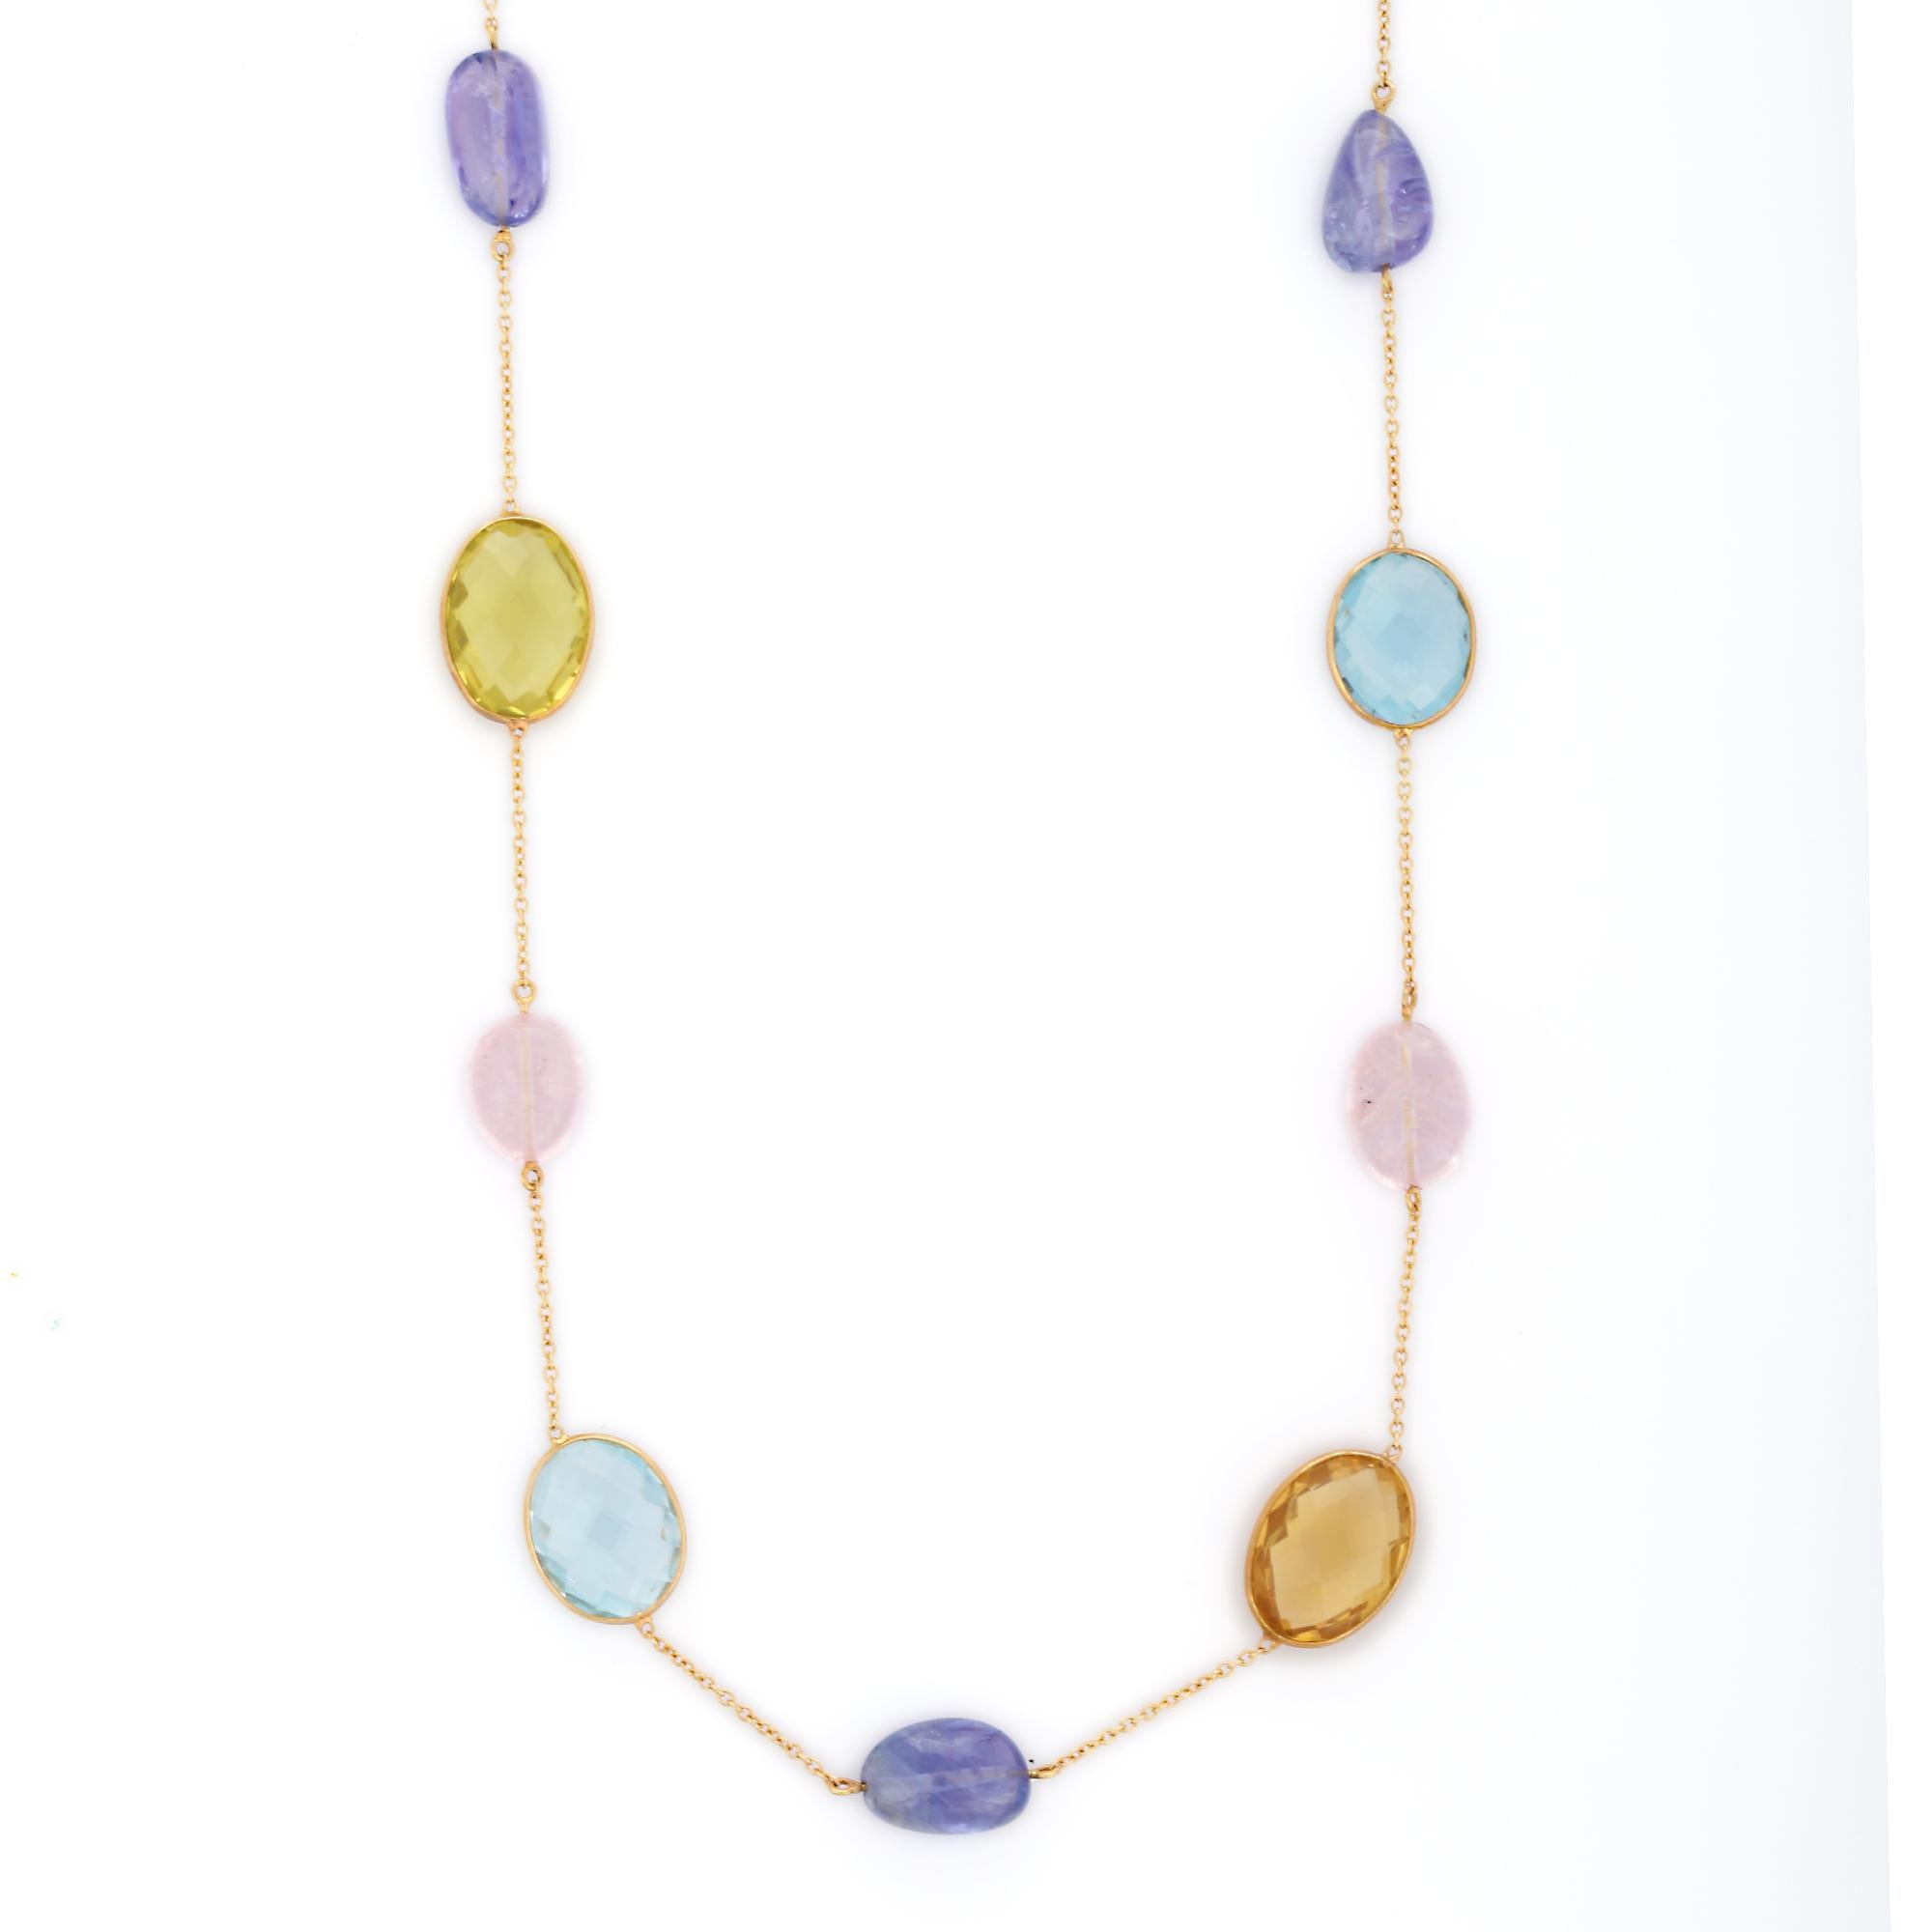 Multi Gemstone Chain Necklace in 18K Gold studded with mix cut multi gemstone.
Accessorize your look with this elegant multi gemstone chain necklace. This stunning piece of jewelry instantly elevates a casual look or dressy outfit. Comfortable and